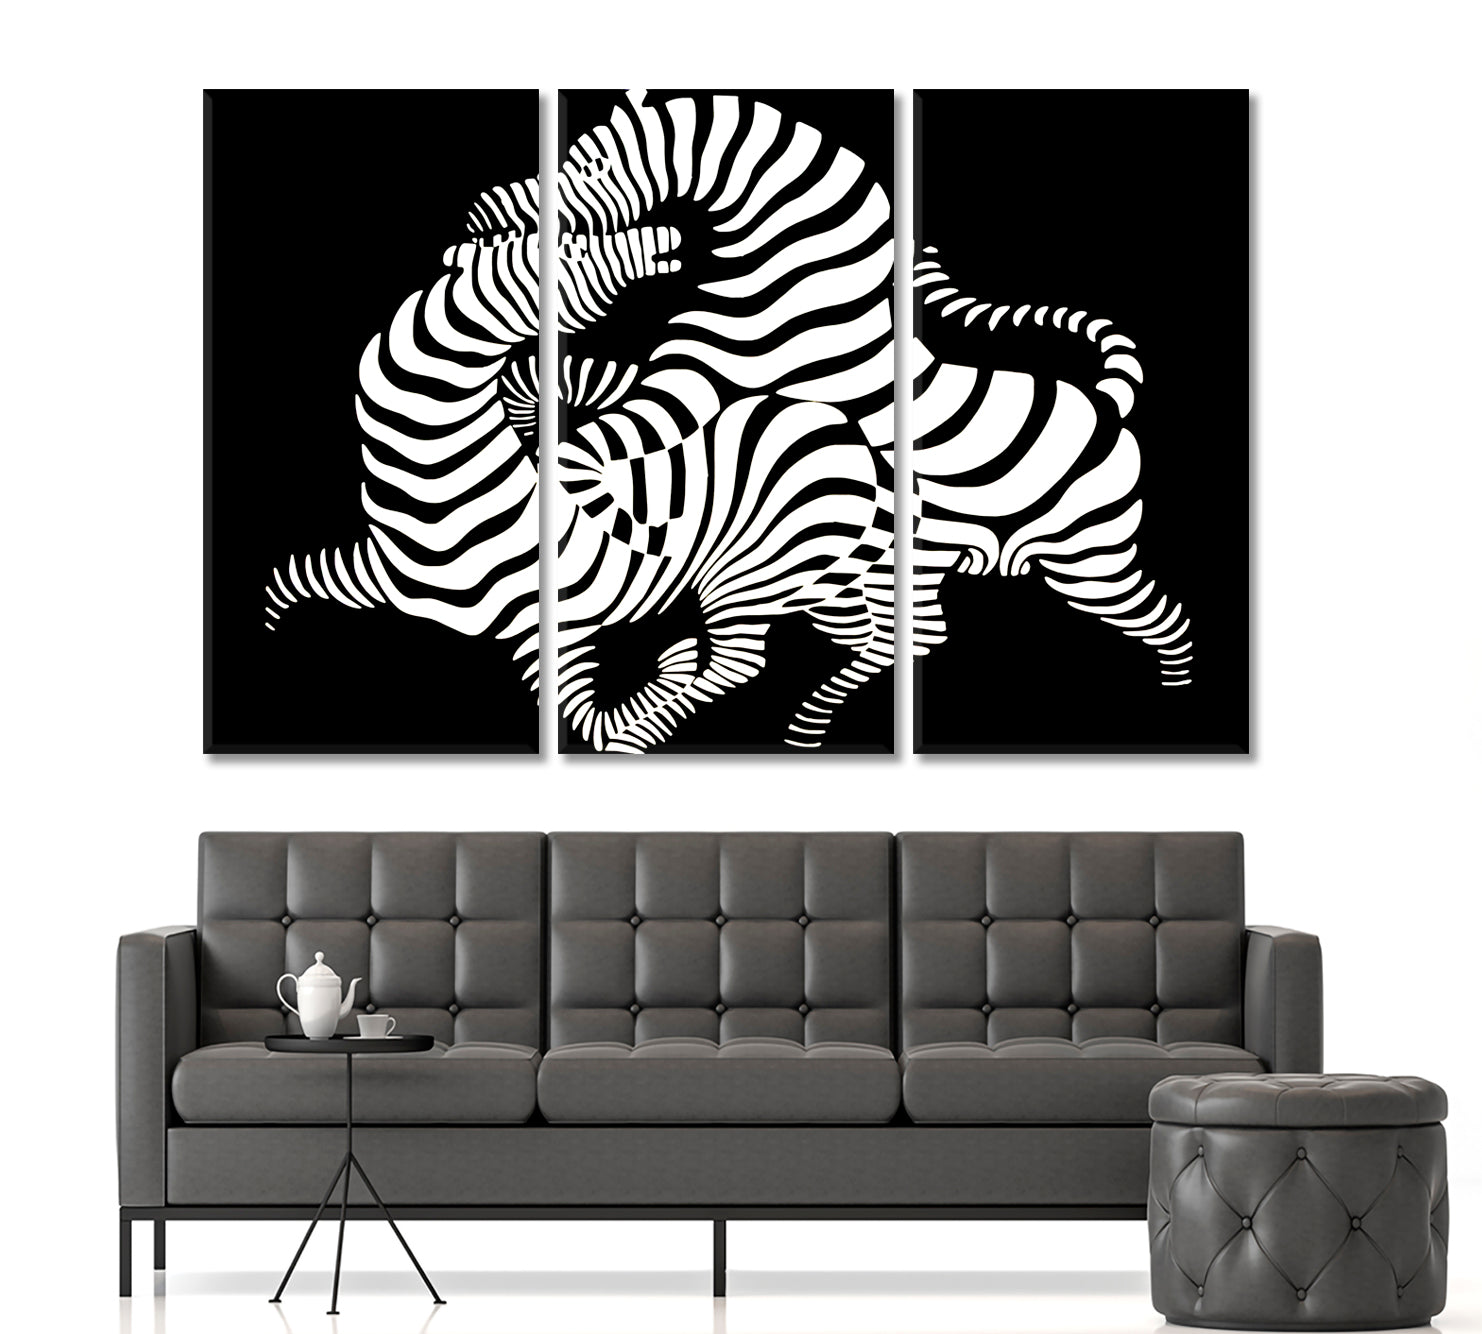 IN LOVE Twisted Zebras Vasarely Style Tricky Optical Illusion Op-art Contemporary Art Artesty 3 panels 36" x 24" 